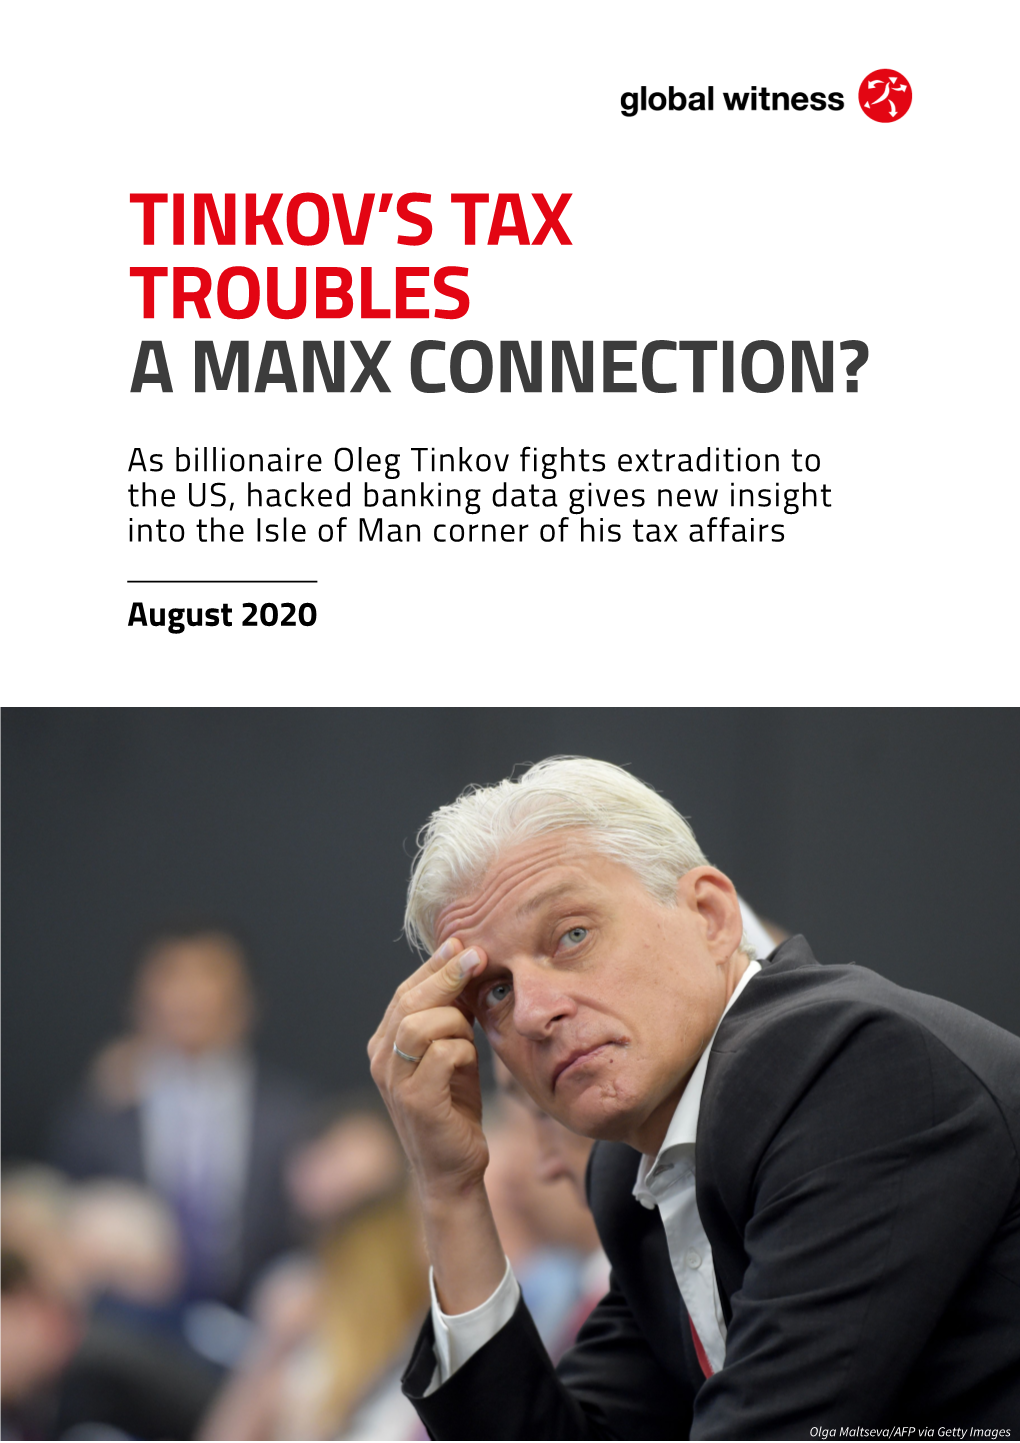 Tinkov's Tax Troubles a Manx Connection?